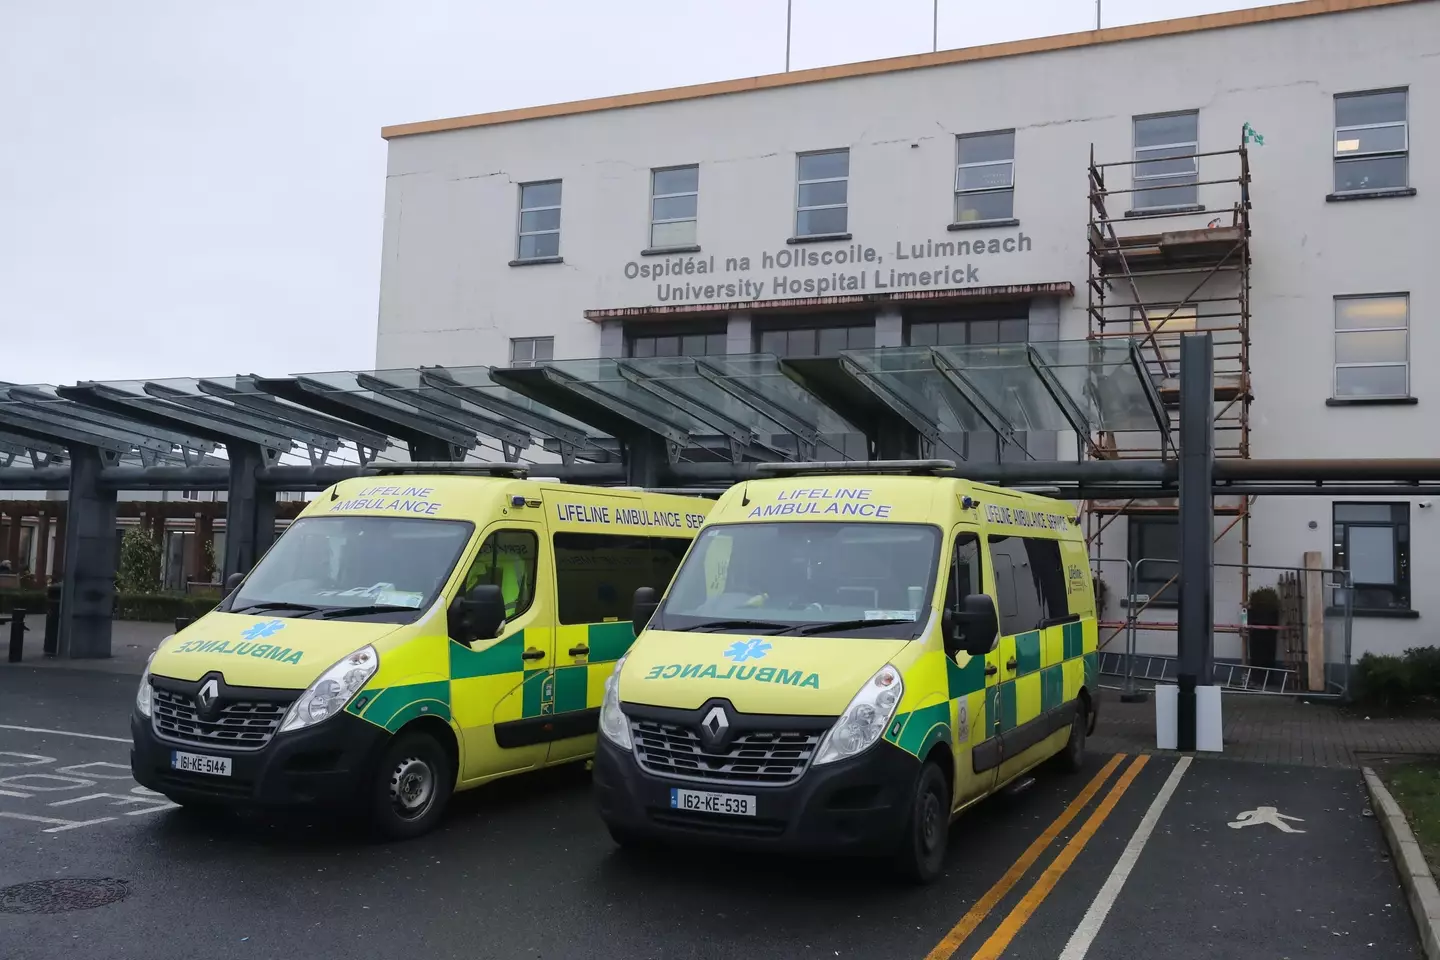 The hospital had been experiencing its 'busiest weekend ever' and it's believed that staff had repeatedly raised concerns over the overcrowding.